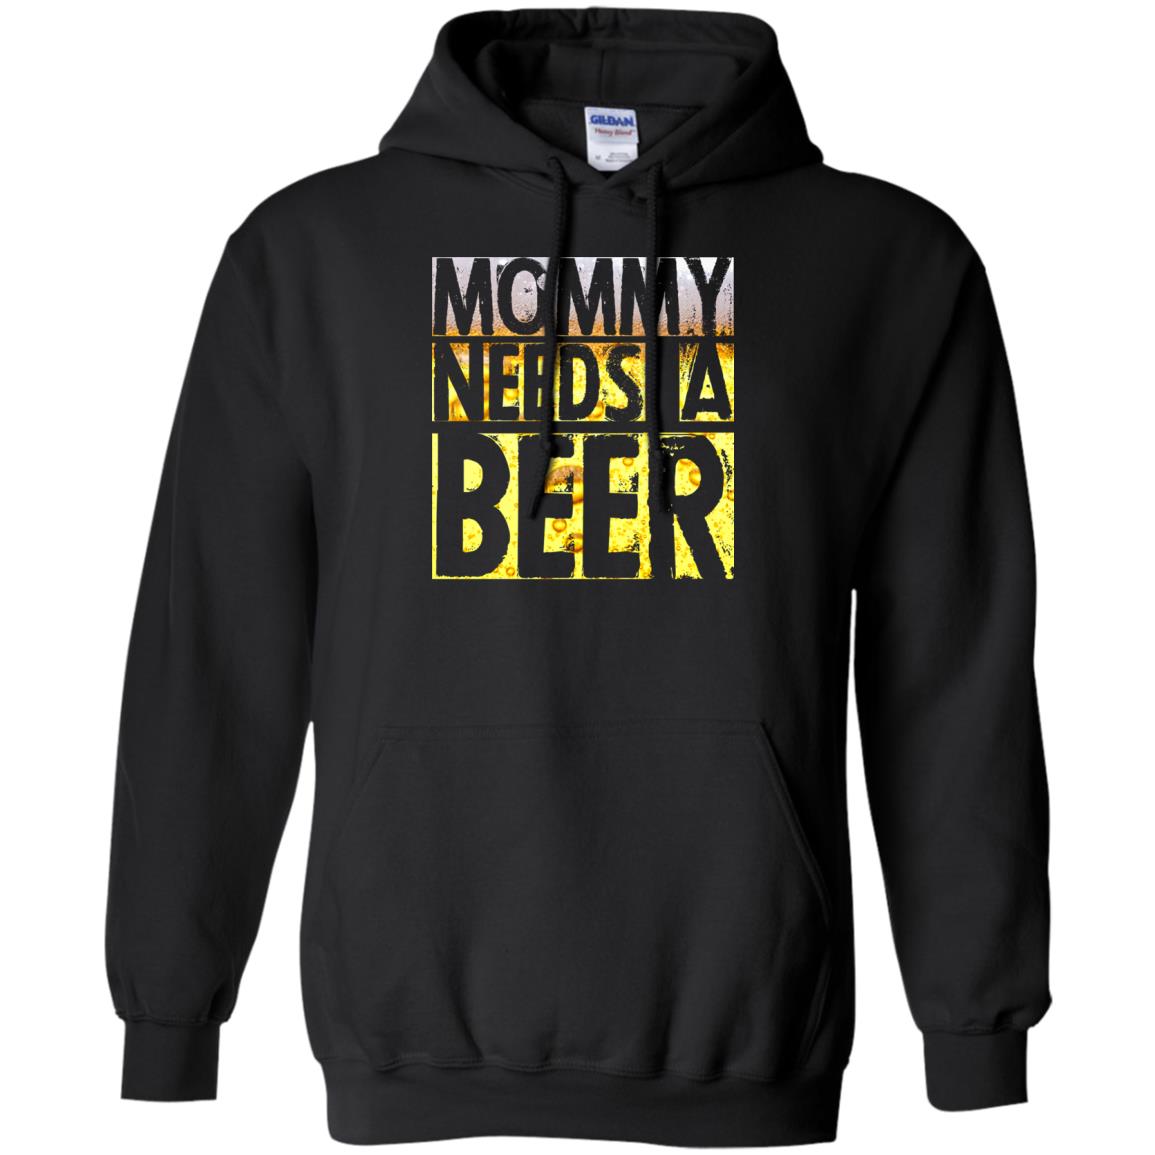 Mommy Needs A Beer Shirt For Mom Loves BeerG185 Gildan Pullover Hoodie 8 oz.